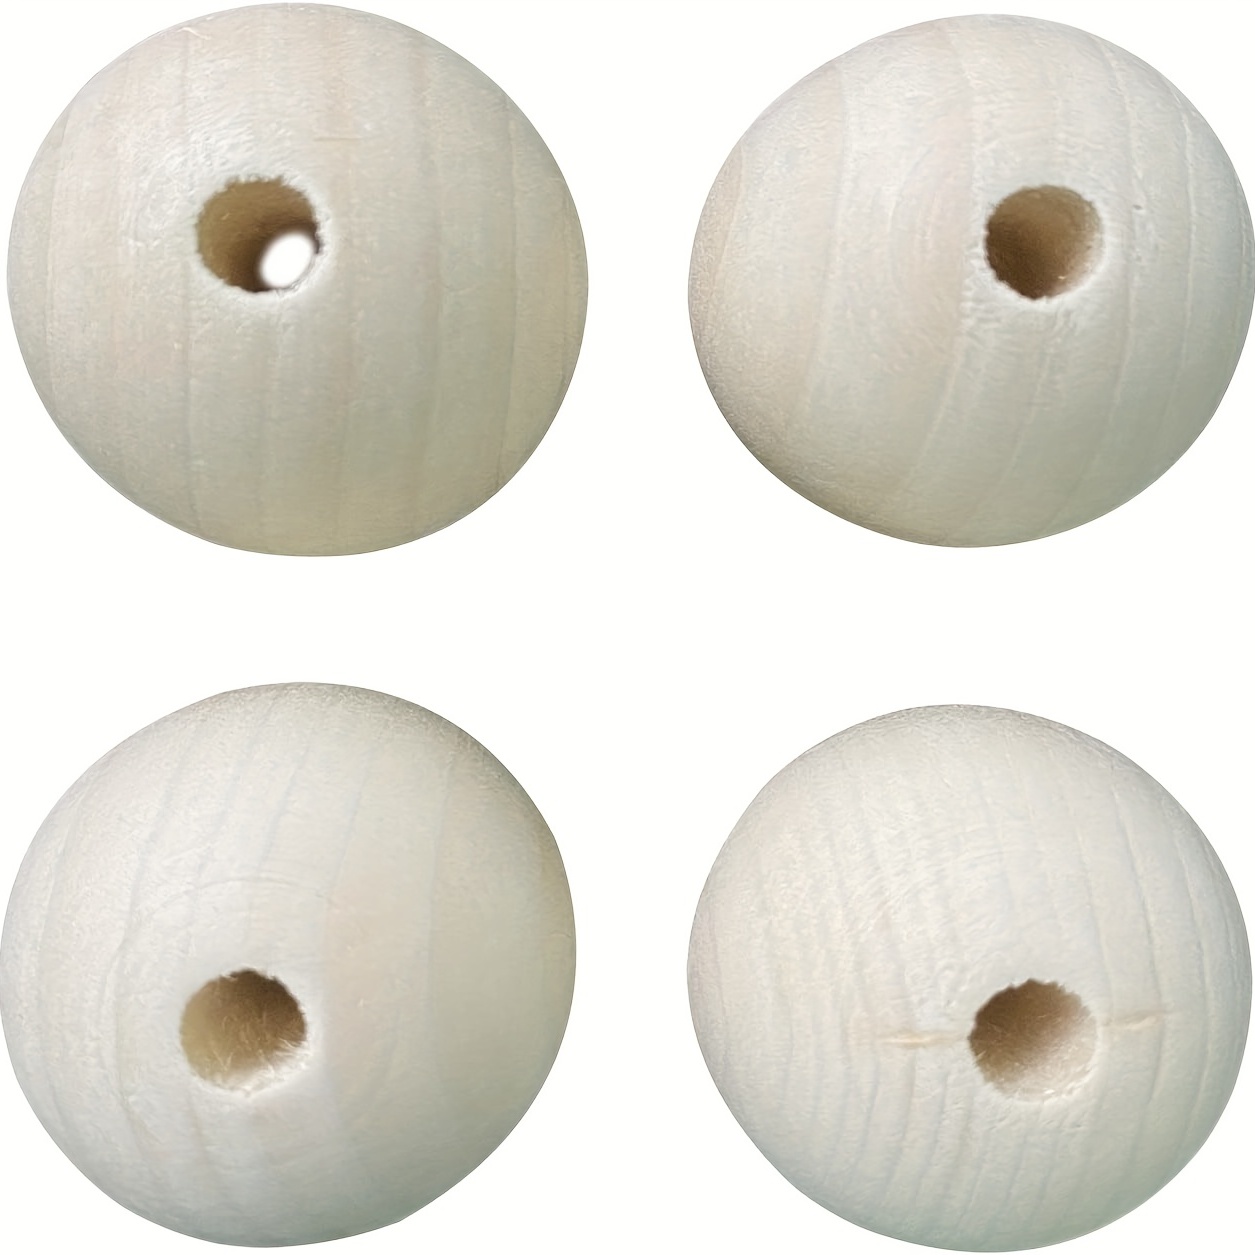 Wooden Beads, 100PCS Natural Wood Beads, Unfinished Wood Beads Bulk, Round  Wooden Beads for Crafts, 3 Sizes Smooth Wooden Balls with Holes for